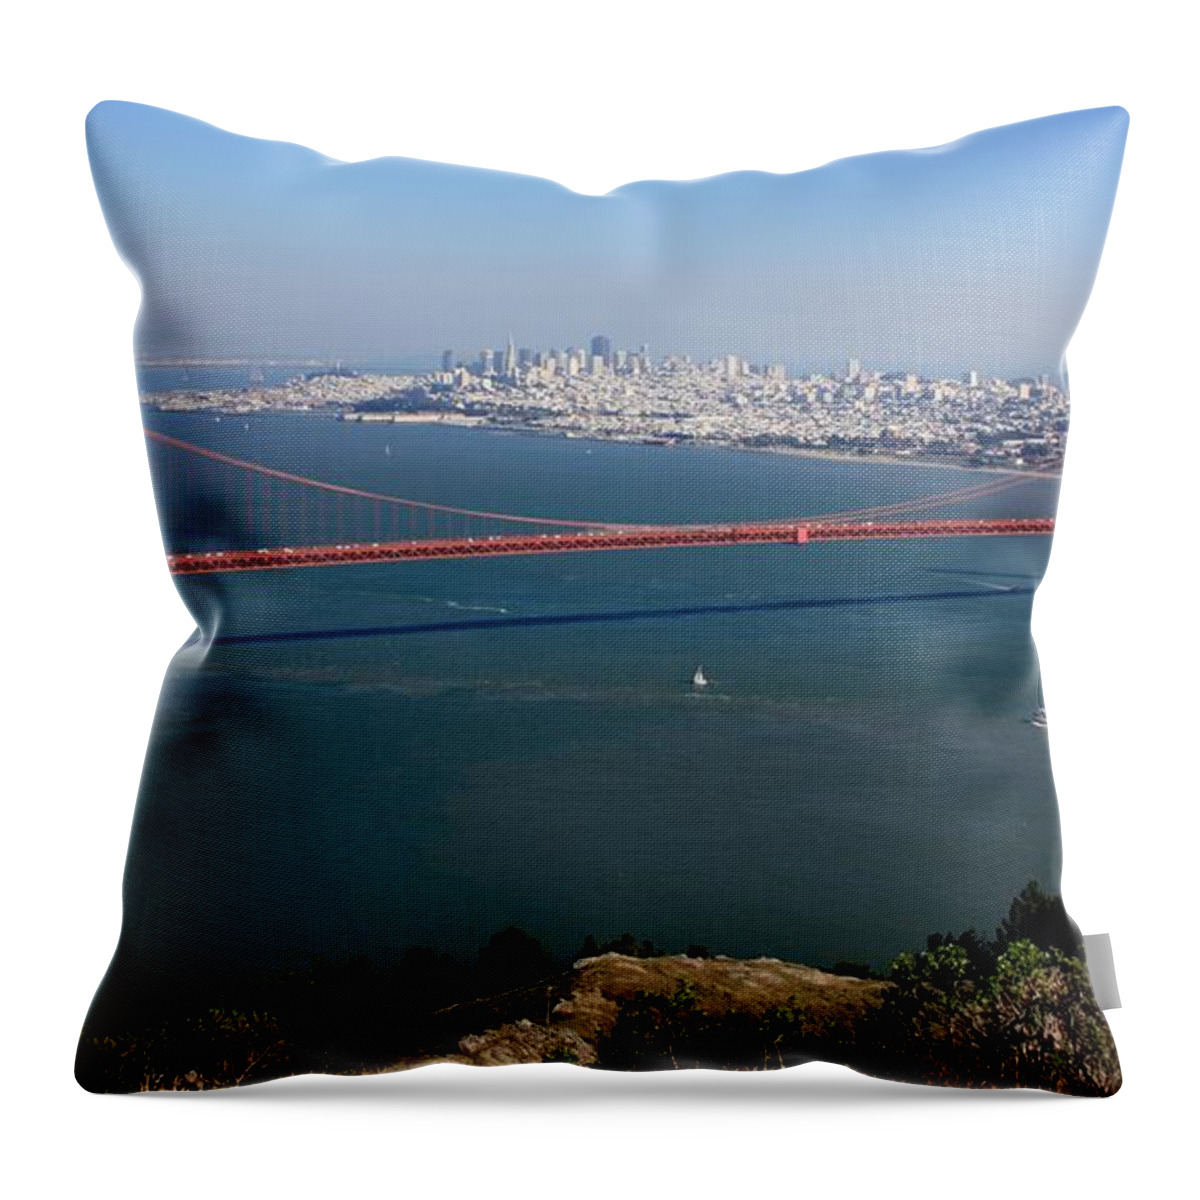 Scenics Throw Pillow featuring the photograph Golden Gate Bidge And Bay by J.castro